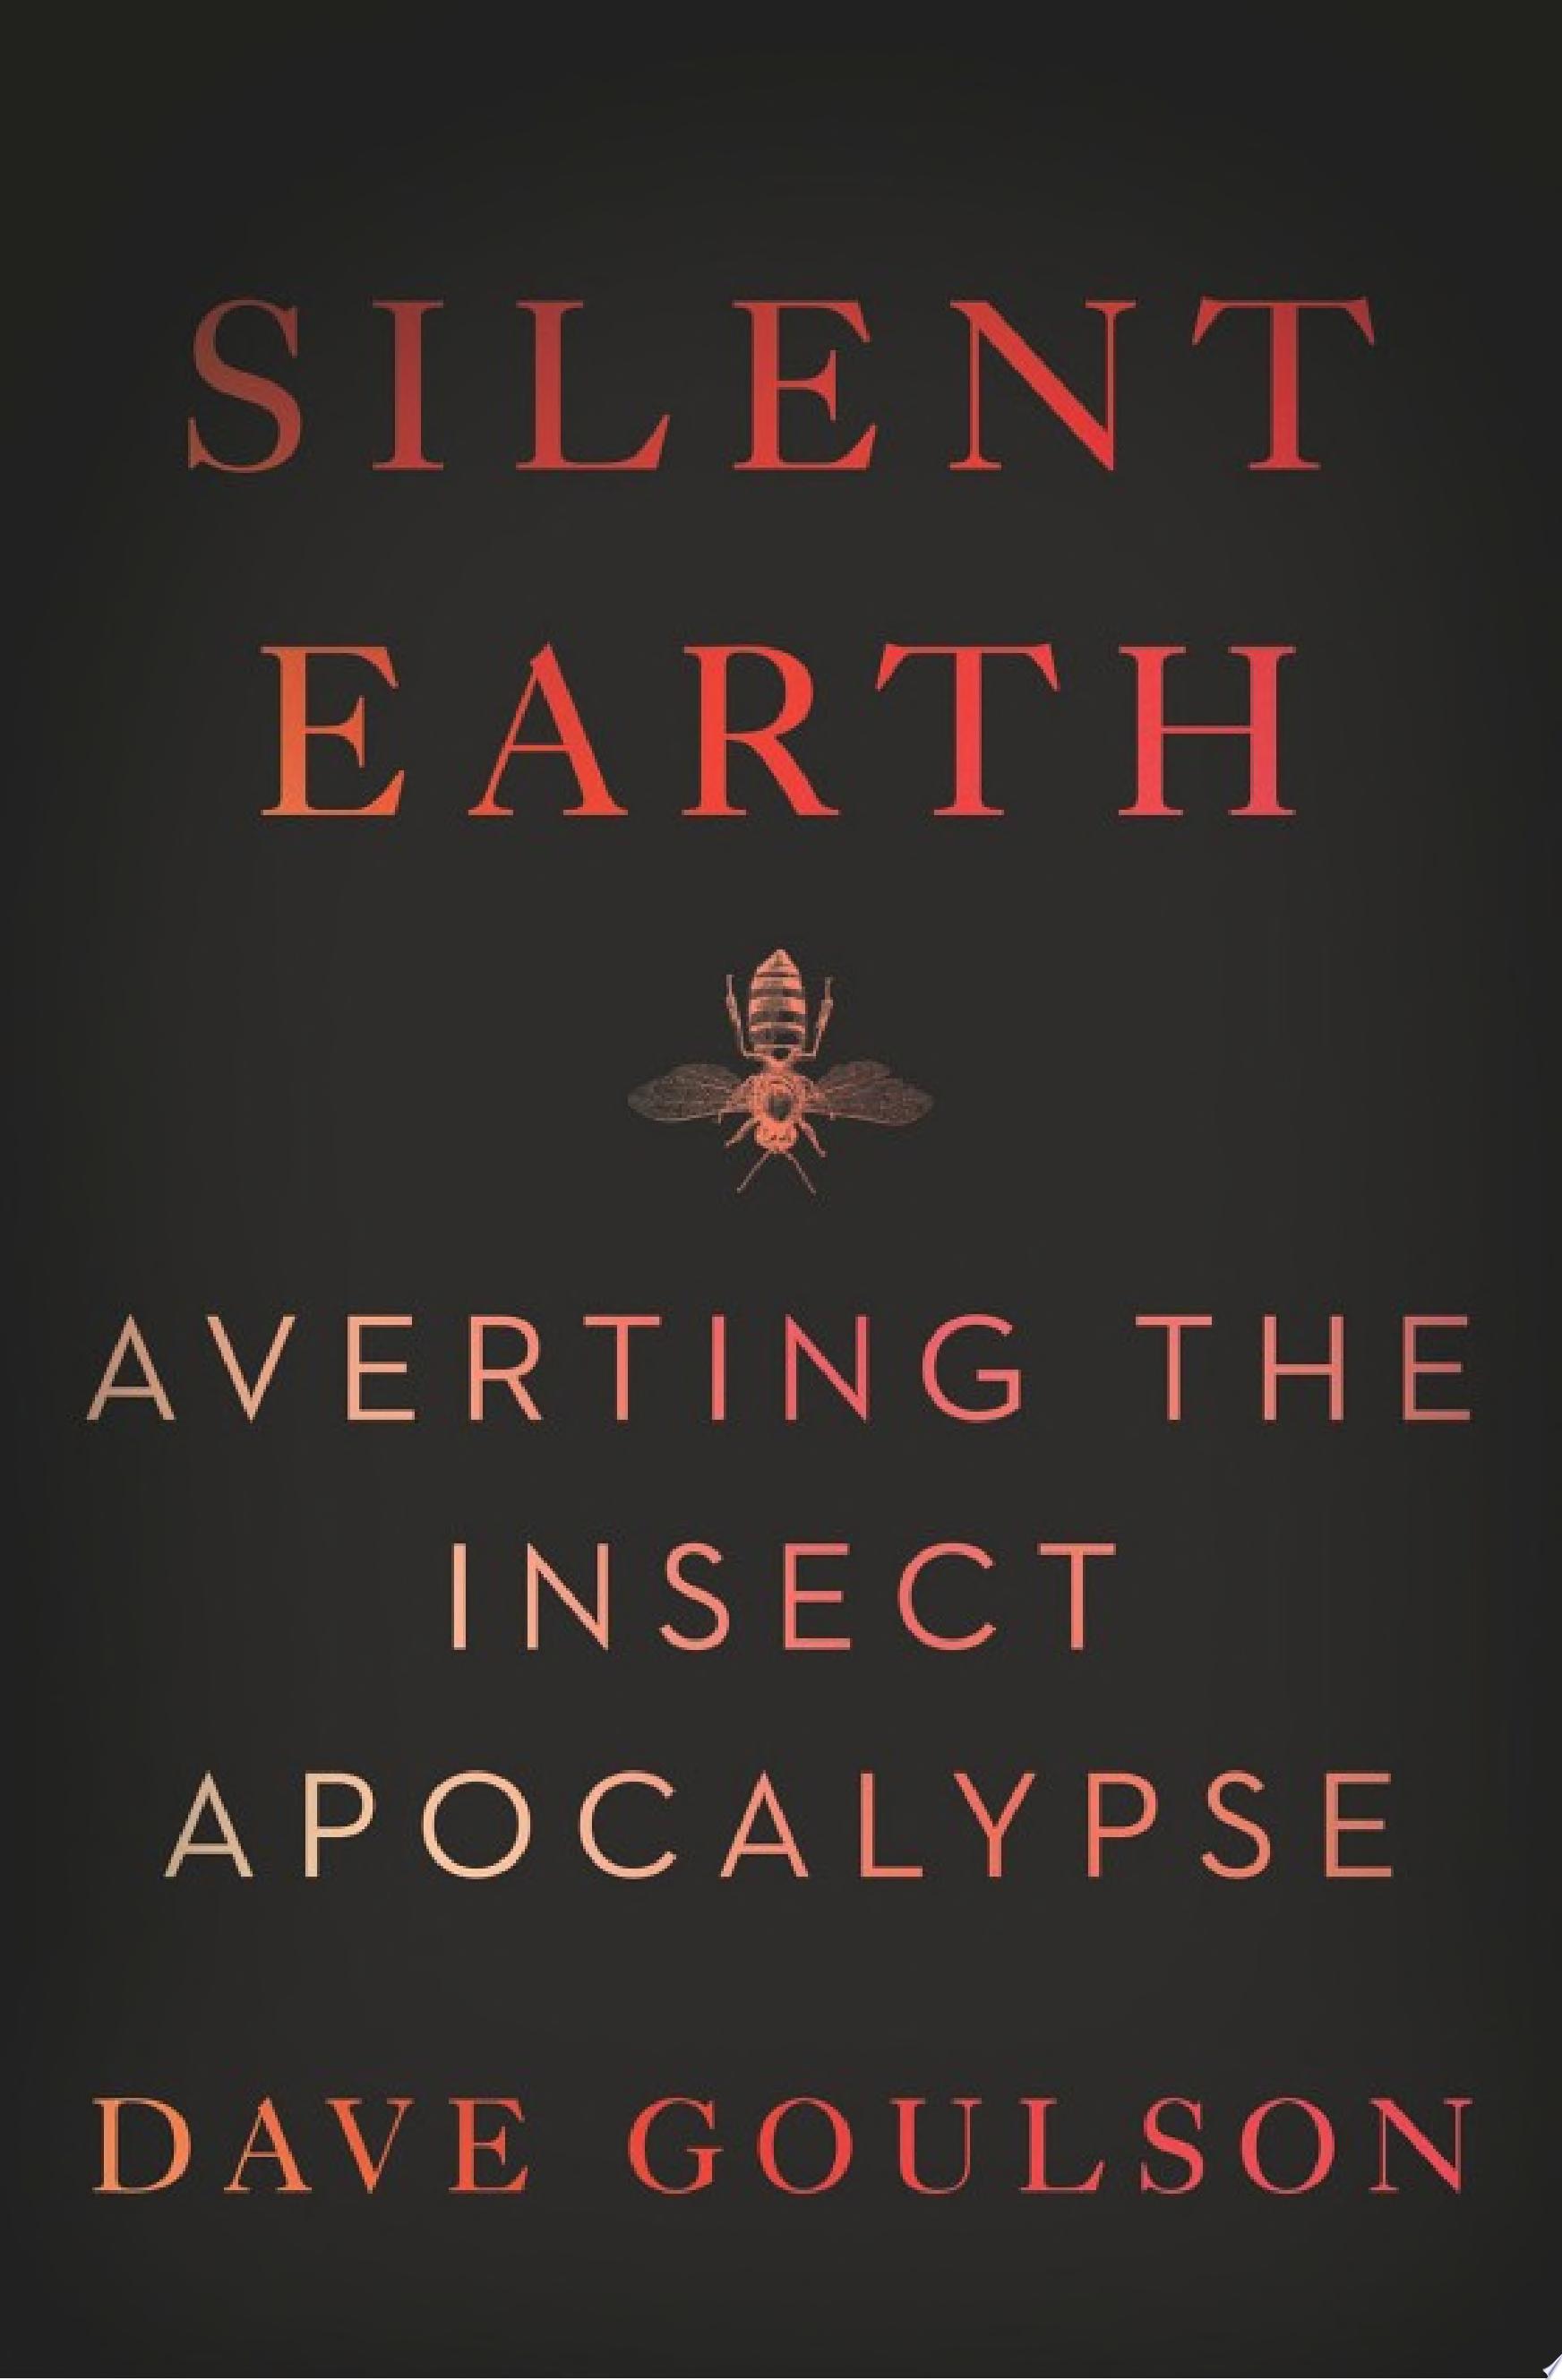 Image for "Silent Earth"